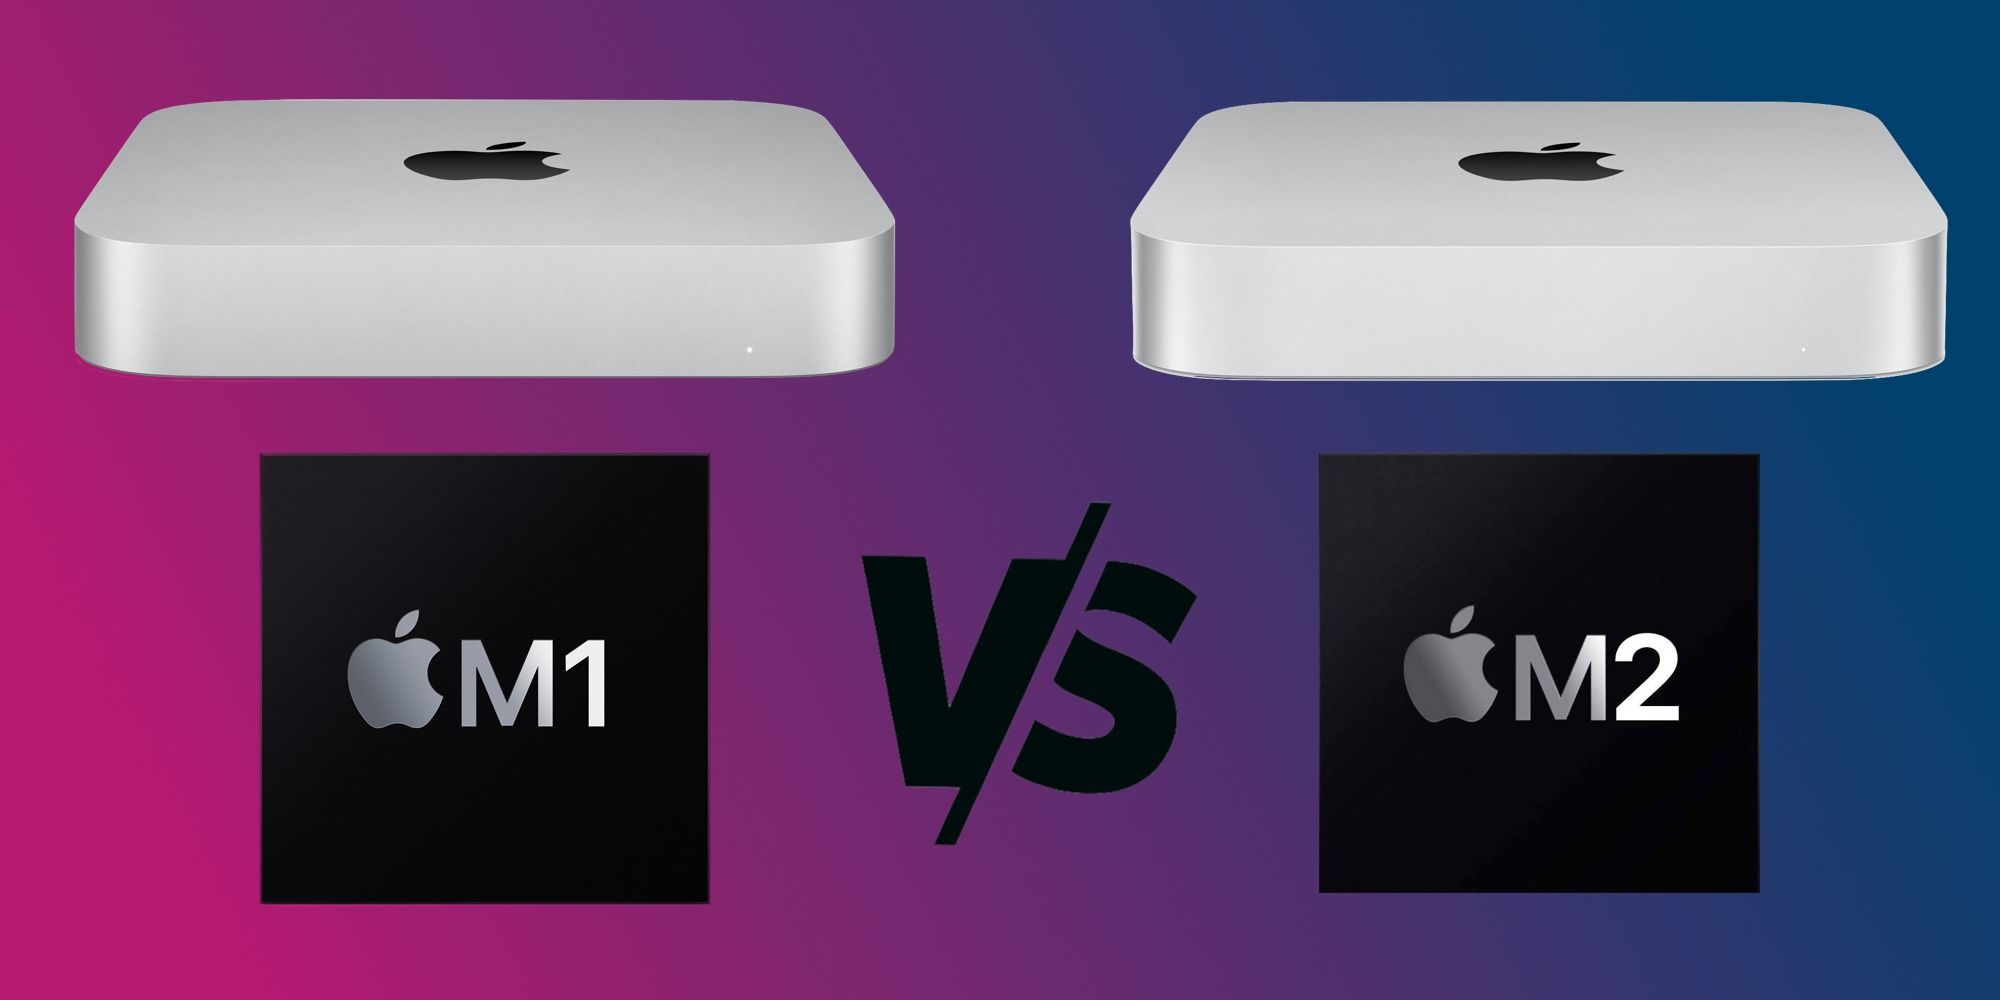 Mac Mini with M1 and M2 chips separated by versus symbol